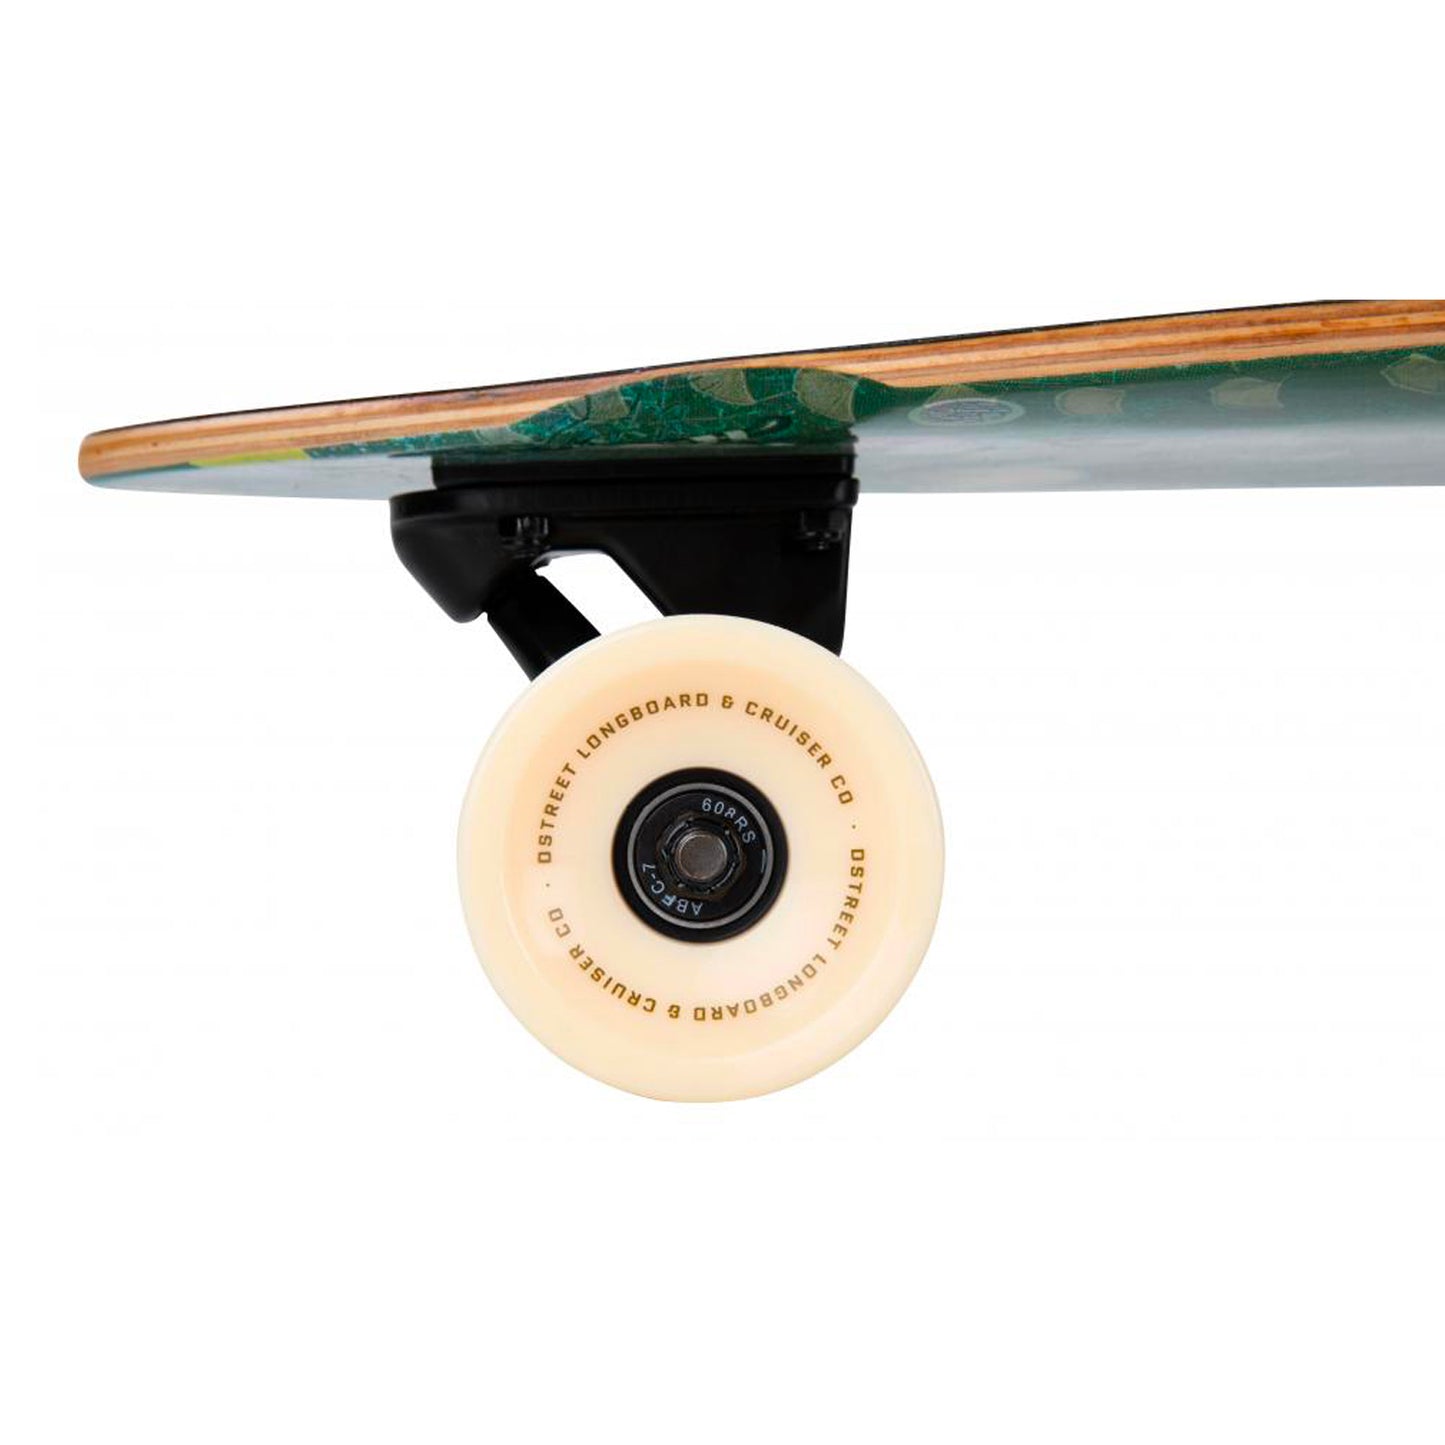 D Street Woodland Pintail 40" - Multi - Prime Delux Store